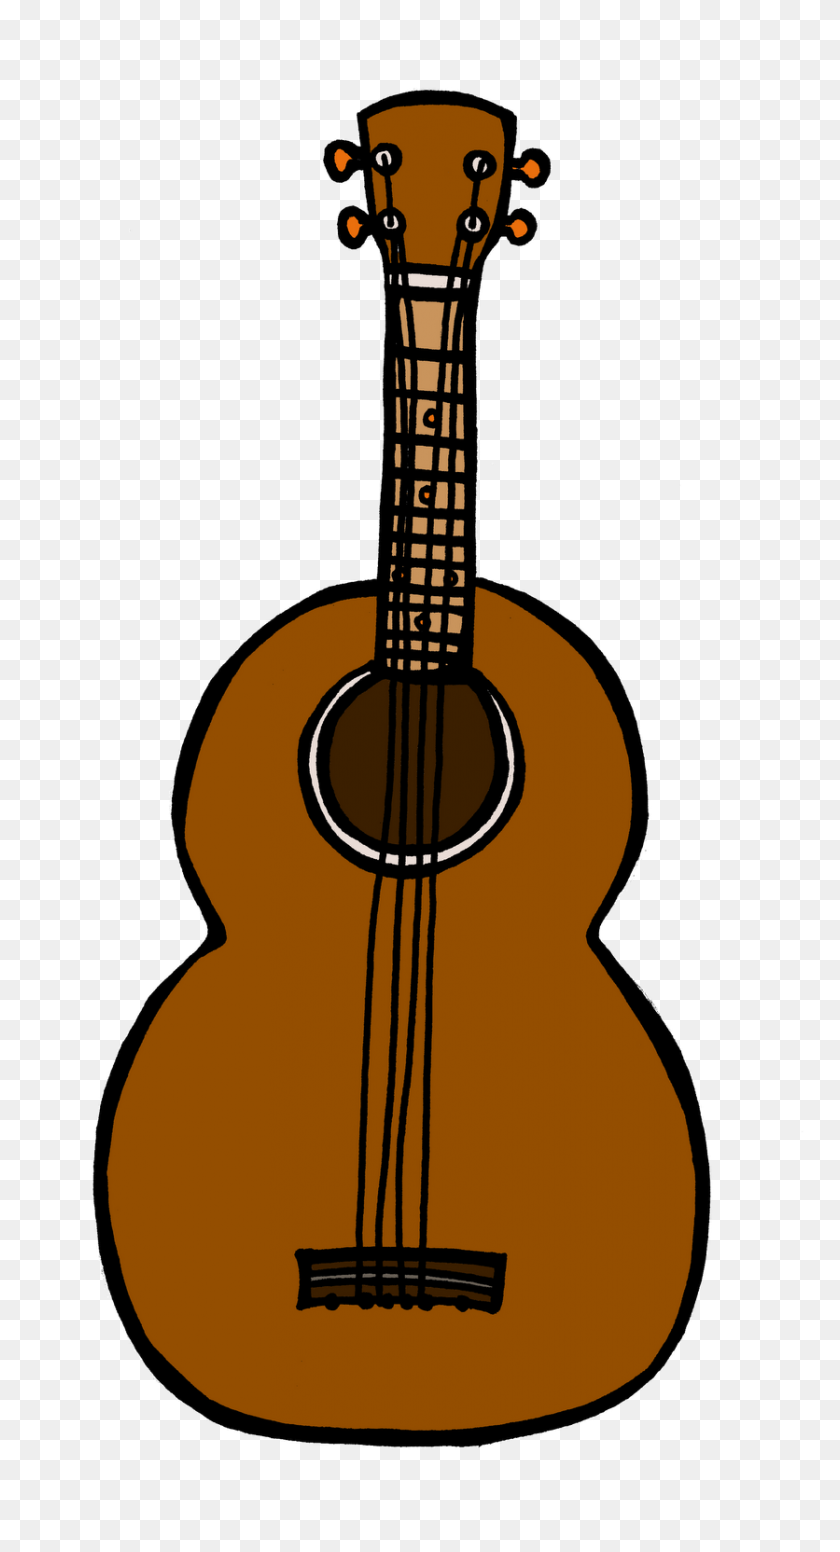 836x1600 Guitar Clipart Distressed - Distressed Clipart